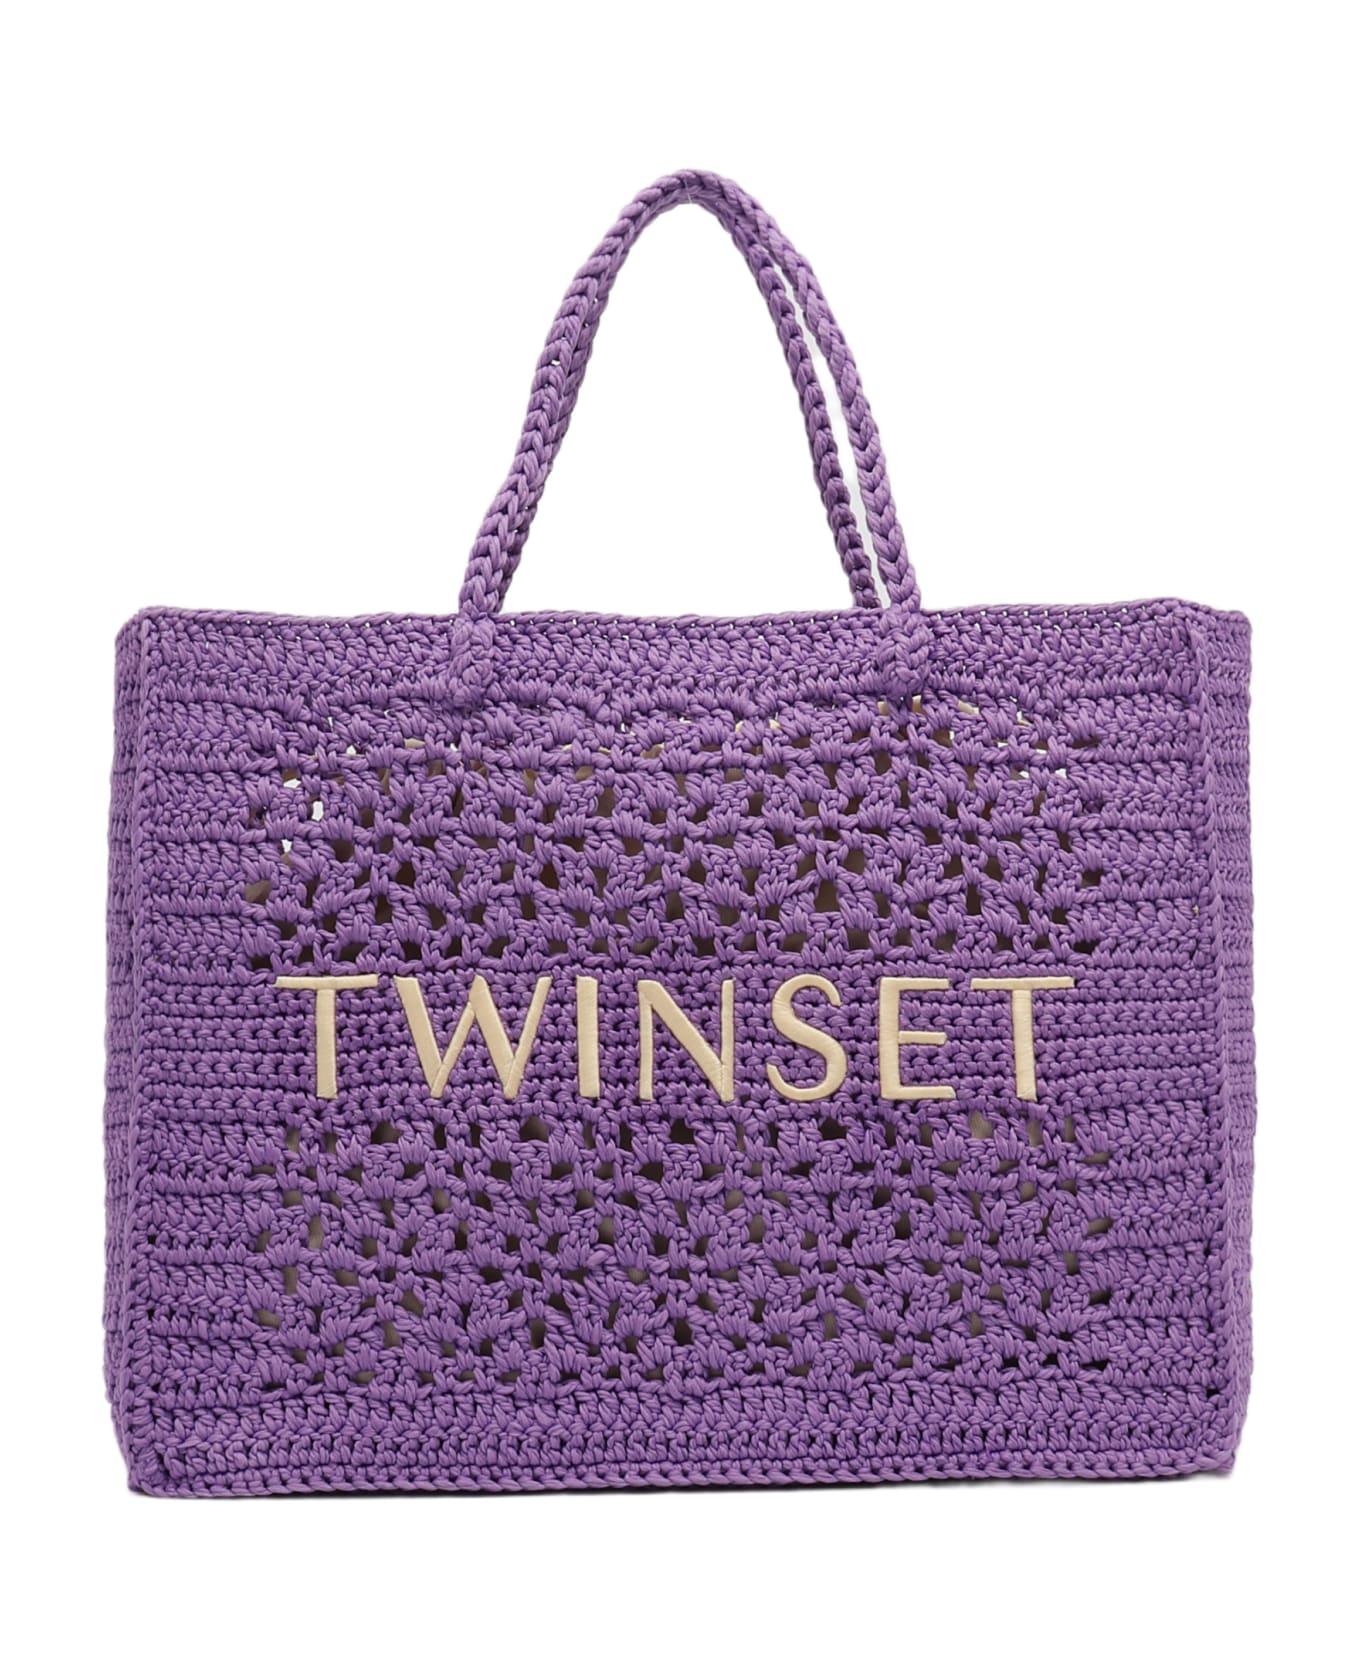 TwinSet Poliester Tote - GIACINTO トートバッグ